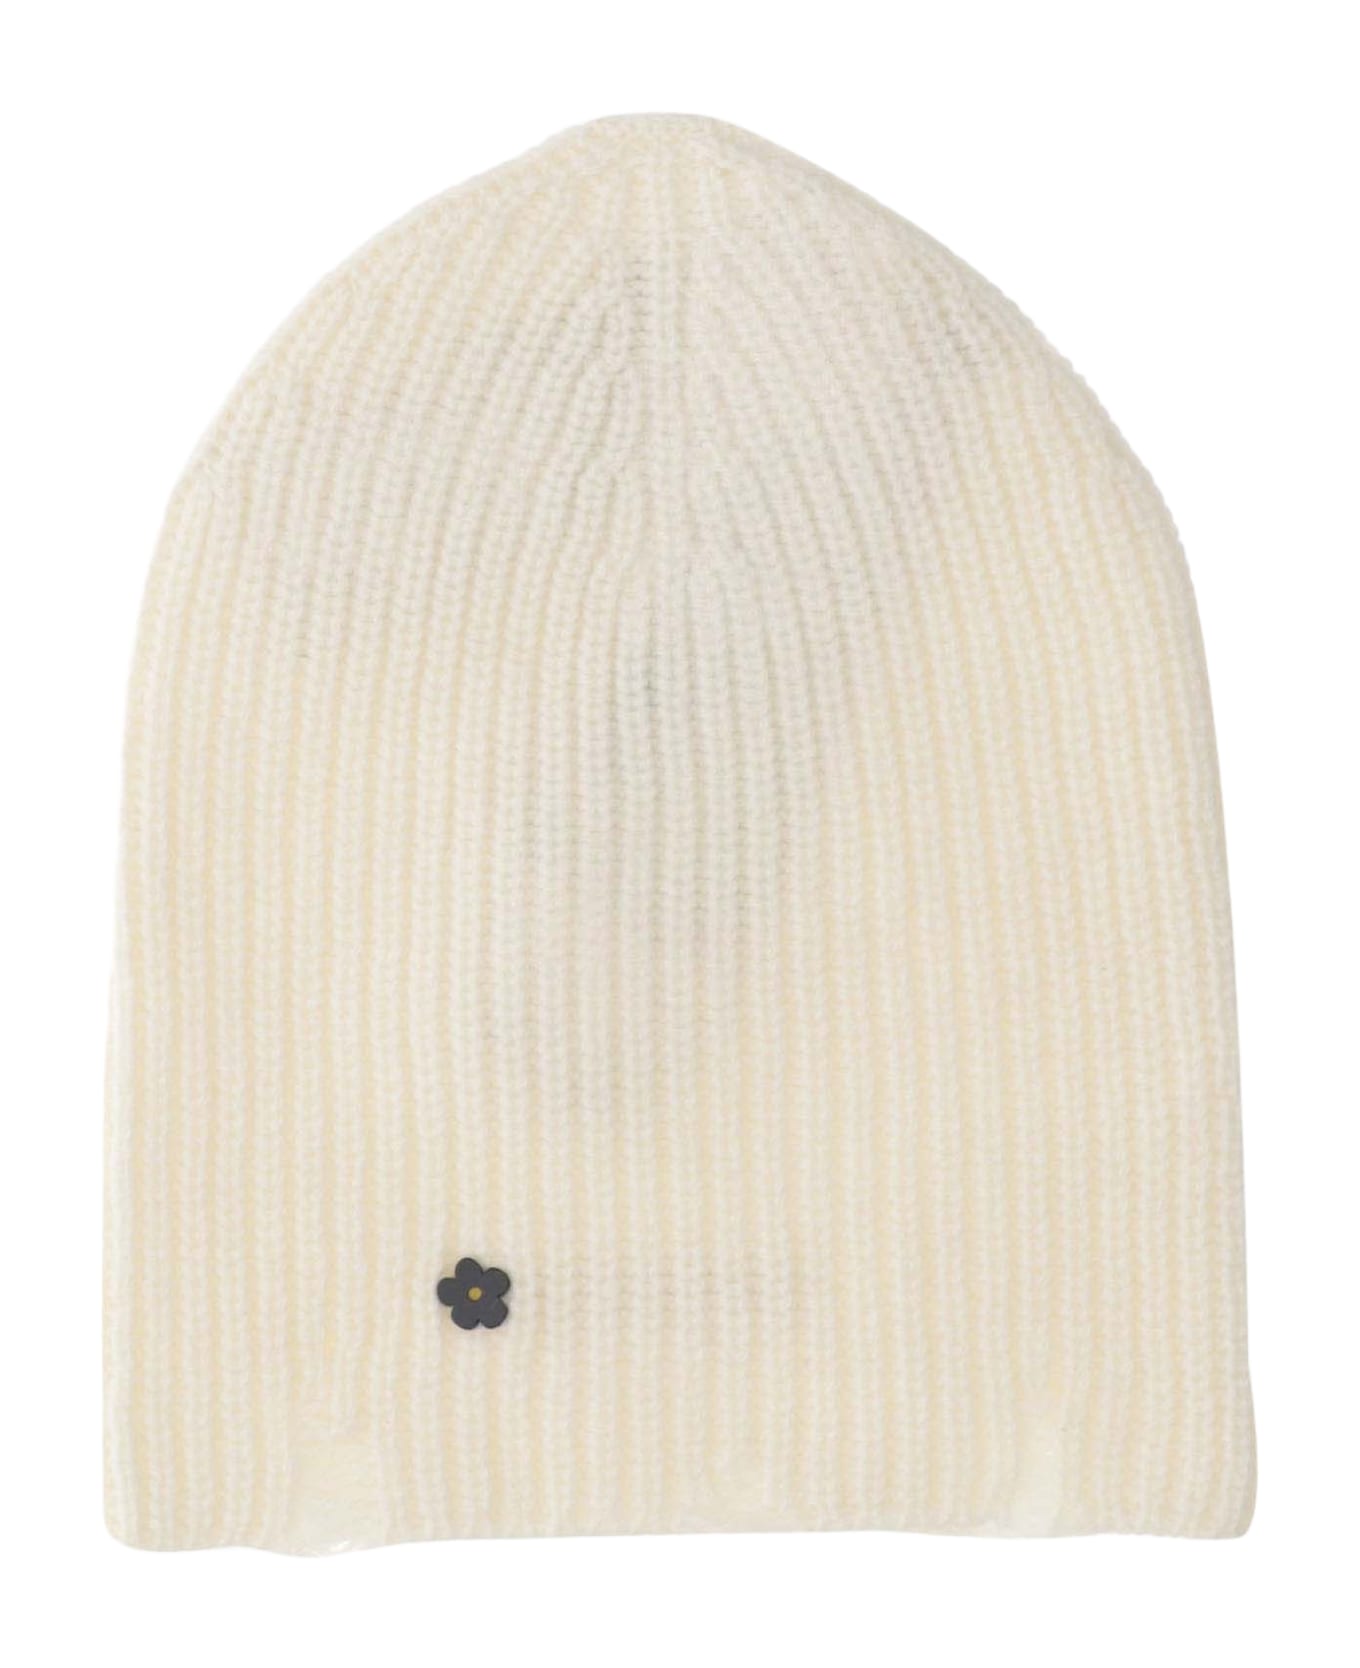 A Paper Kid Wool And Cashmere Beanie - Beige